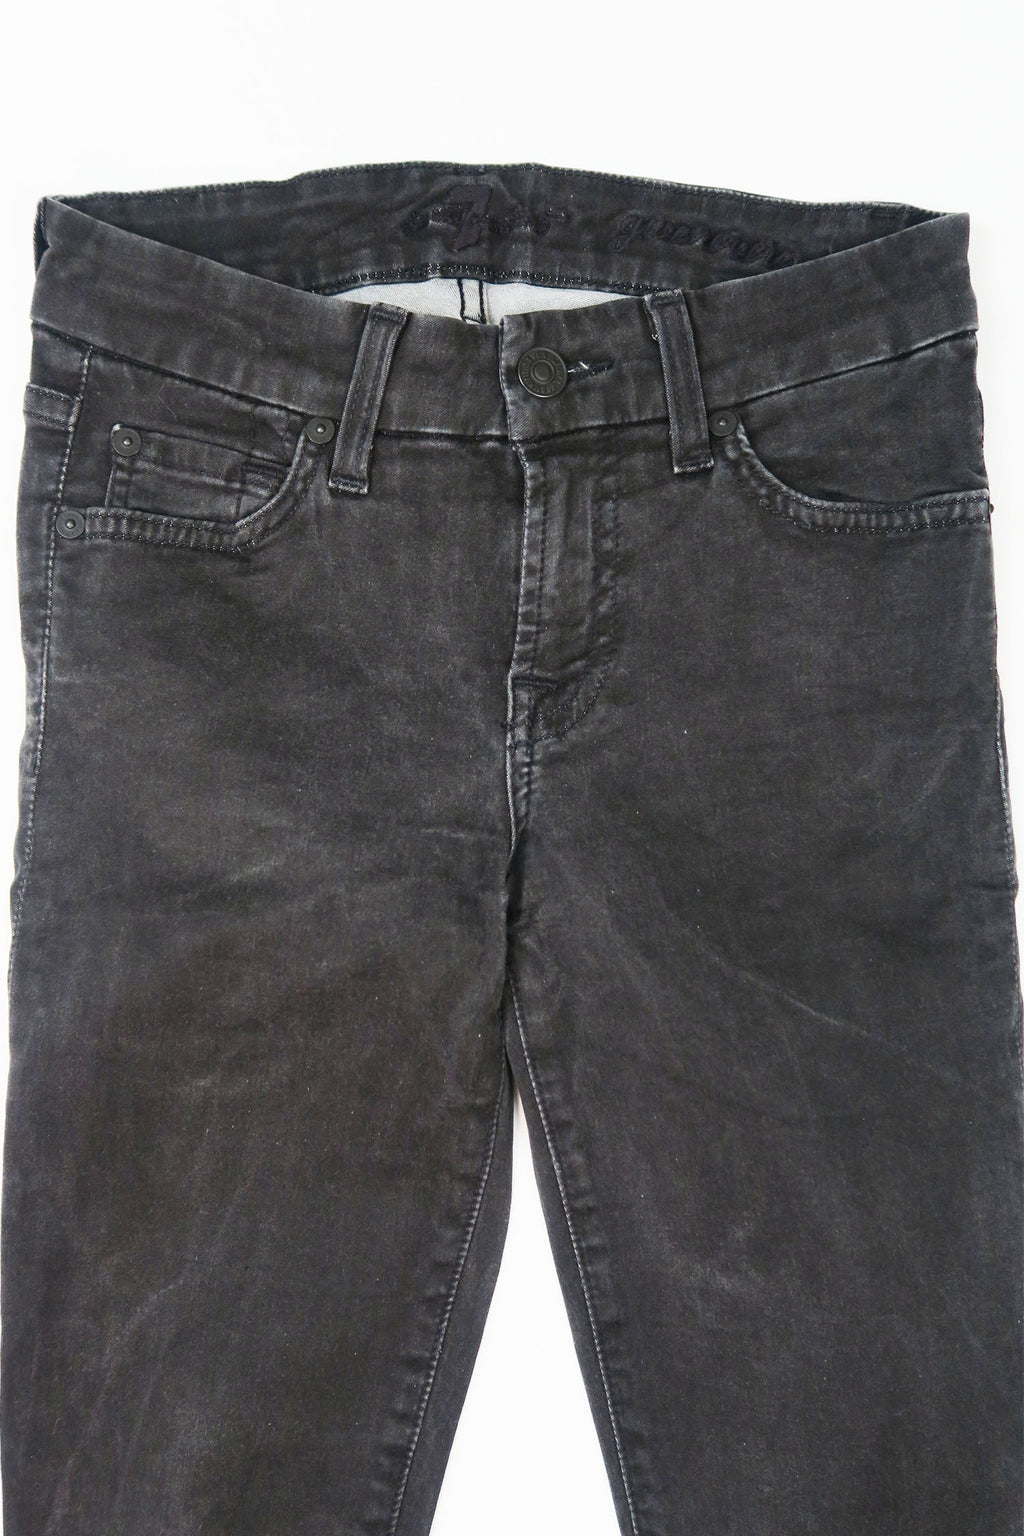 7 For All Mankind Mid-Rise Skinny sz 24